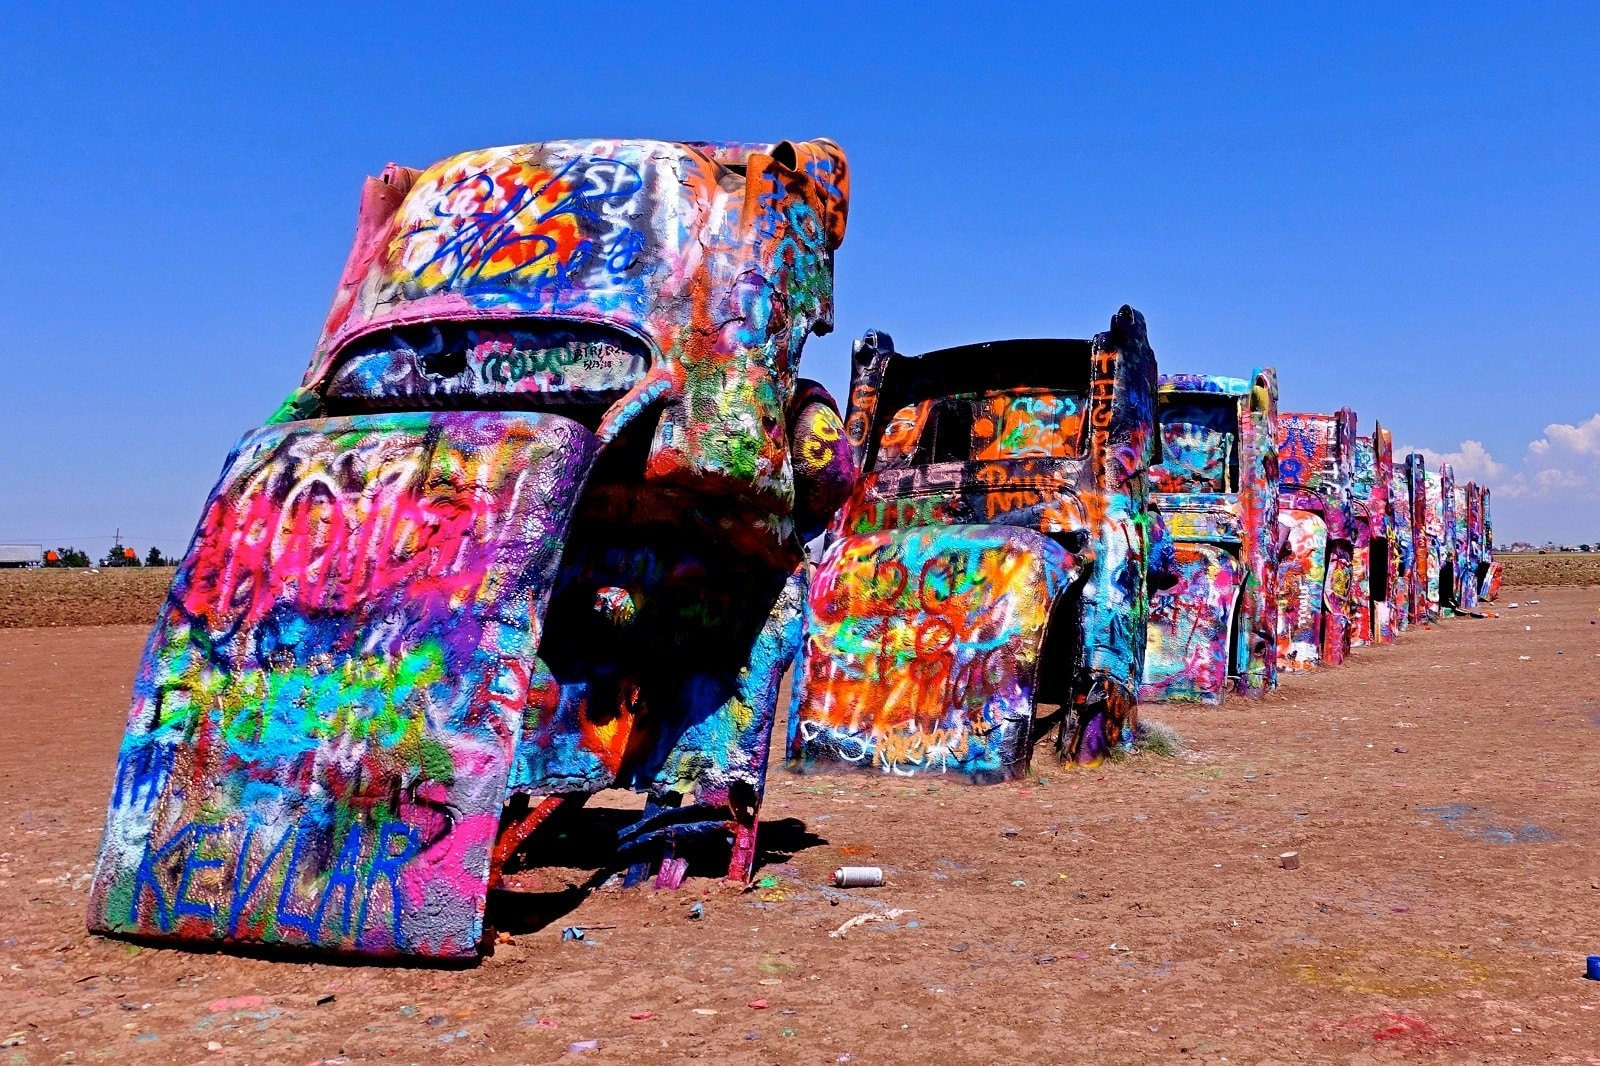 <p><span>Cadillac Ranch, an iconic art installation near Amarillo, Texas, is a striking tribute to the evolution of the Cadillac tail fin. Ten Cadillac cars are half-buried nose-first in the ground, with their tail fins pointing skyward. </span><span>Created in 1974 by a group of artists known as The Ant Farm, the installation has become a symbol of American pop culture.</span></p> <p><span>Visitors are encouraged to leave their mark on the cars with spray paint, making it an interactive art piece. It’s a must-see for those interested in Americana and public art.</span></p> <p><b>Insider’s Tip: </b><span>Bring your own spray paint to contribute to this ever-changing art piece.</span></p> <p><b>When To Travel: </b><span>Accessible year-round, but spring and fall offer the most pleasant weather.</span></p> <p><b>How To Get There: </b><span>Located along I-40 just west of Amarillo.</span></p>